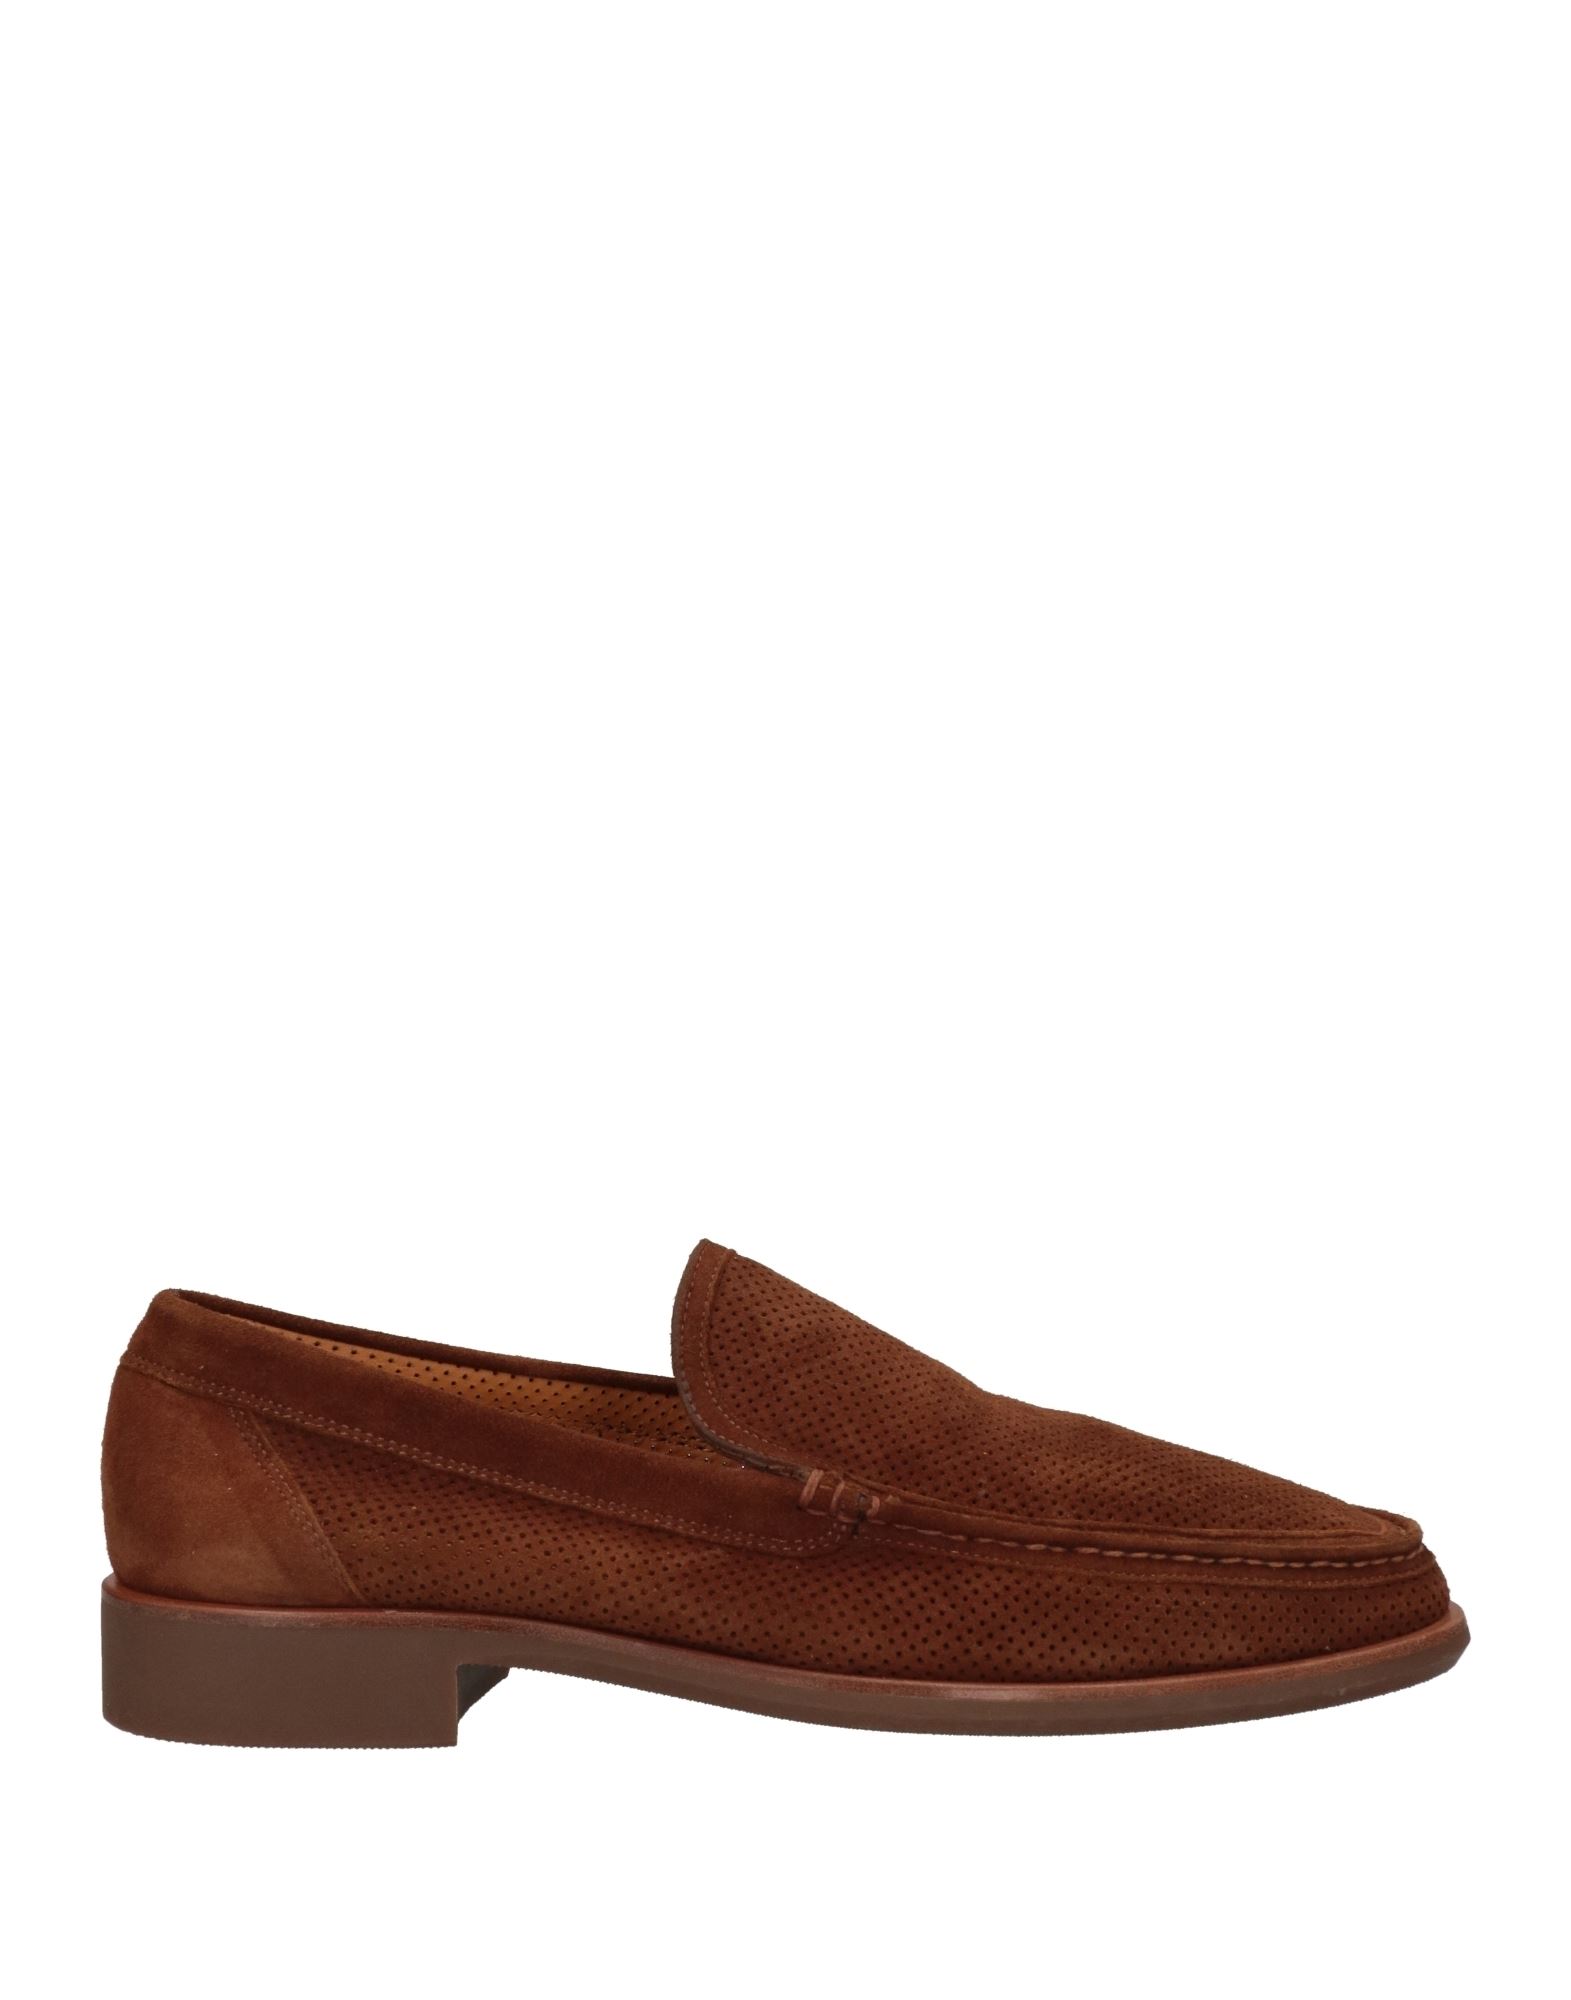 A.testoni Loafers In Camel